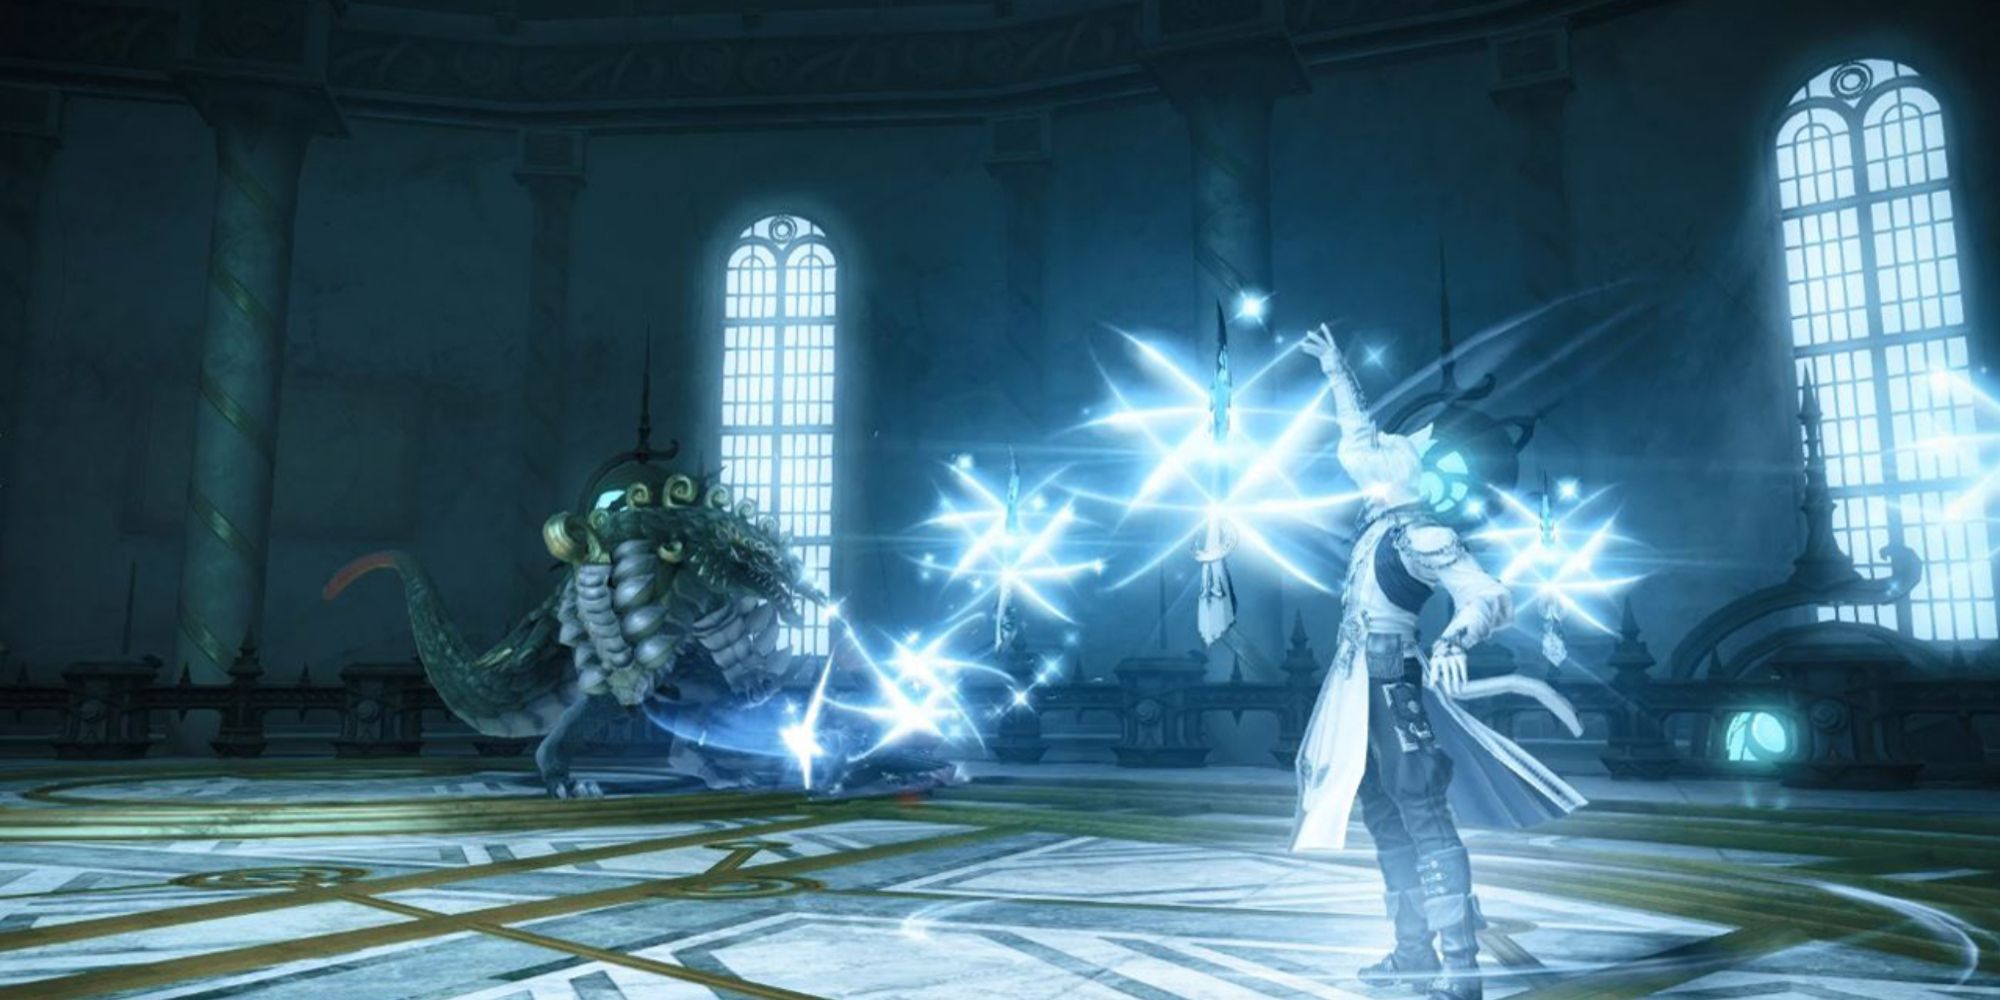 A Sage casting Phlegma on an enemy, using their Nouliths to attack from a distance with magic in Final Fantasy 14